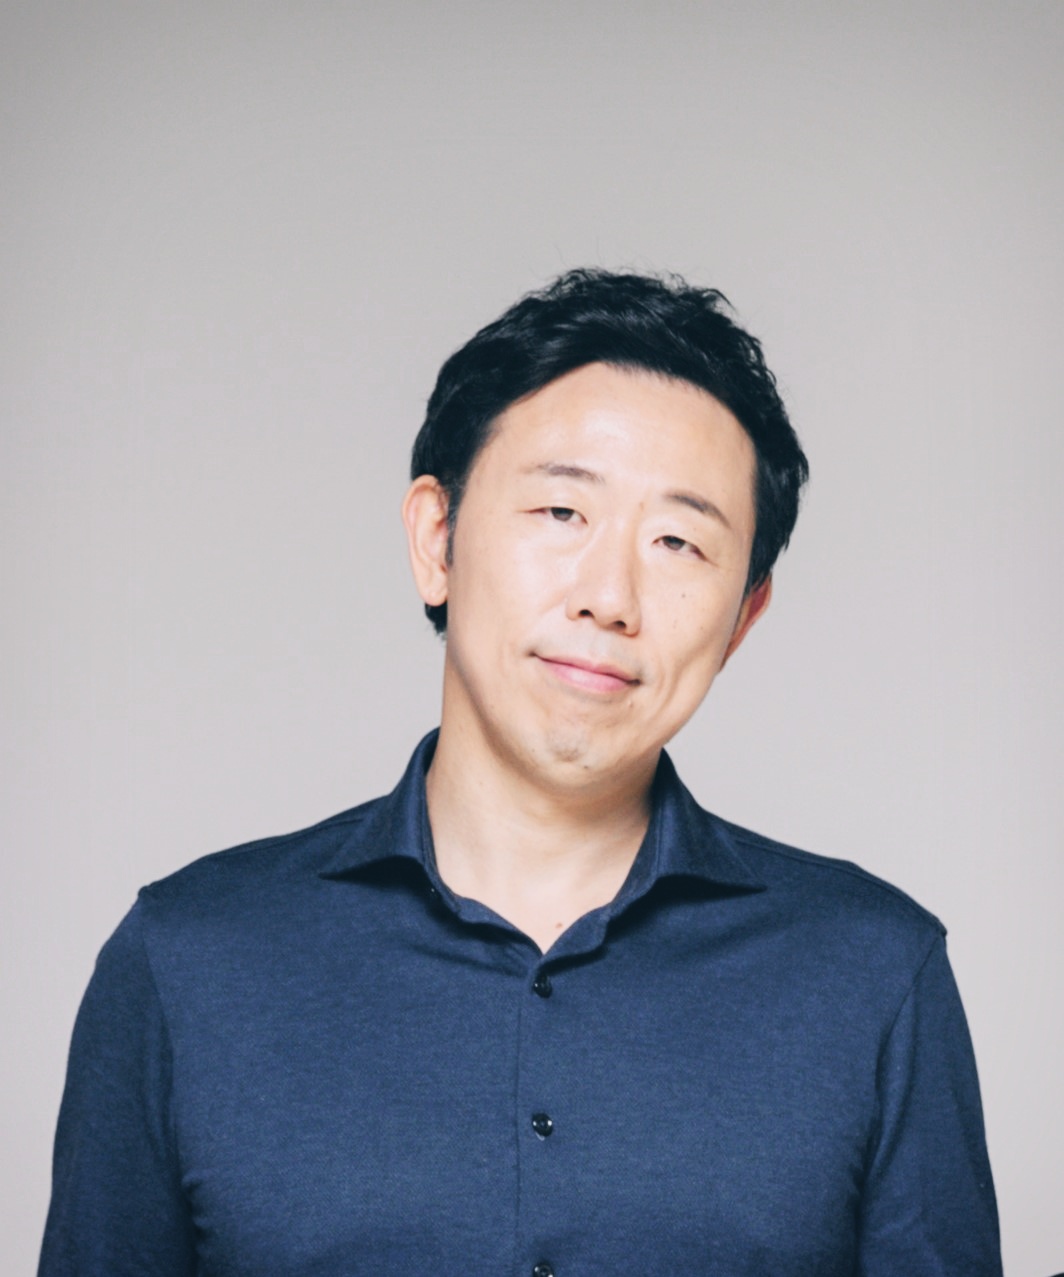 Profile Picture for Deokhyo Choi